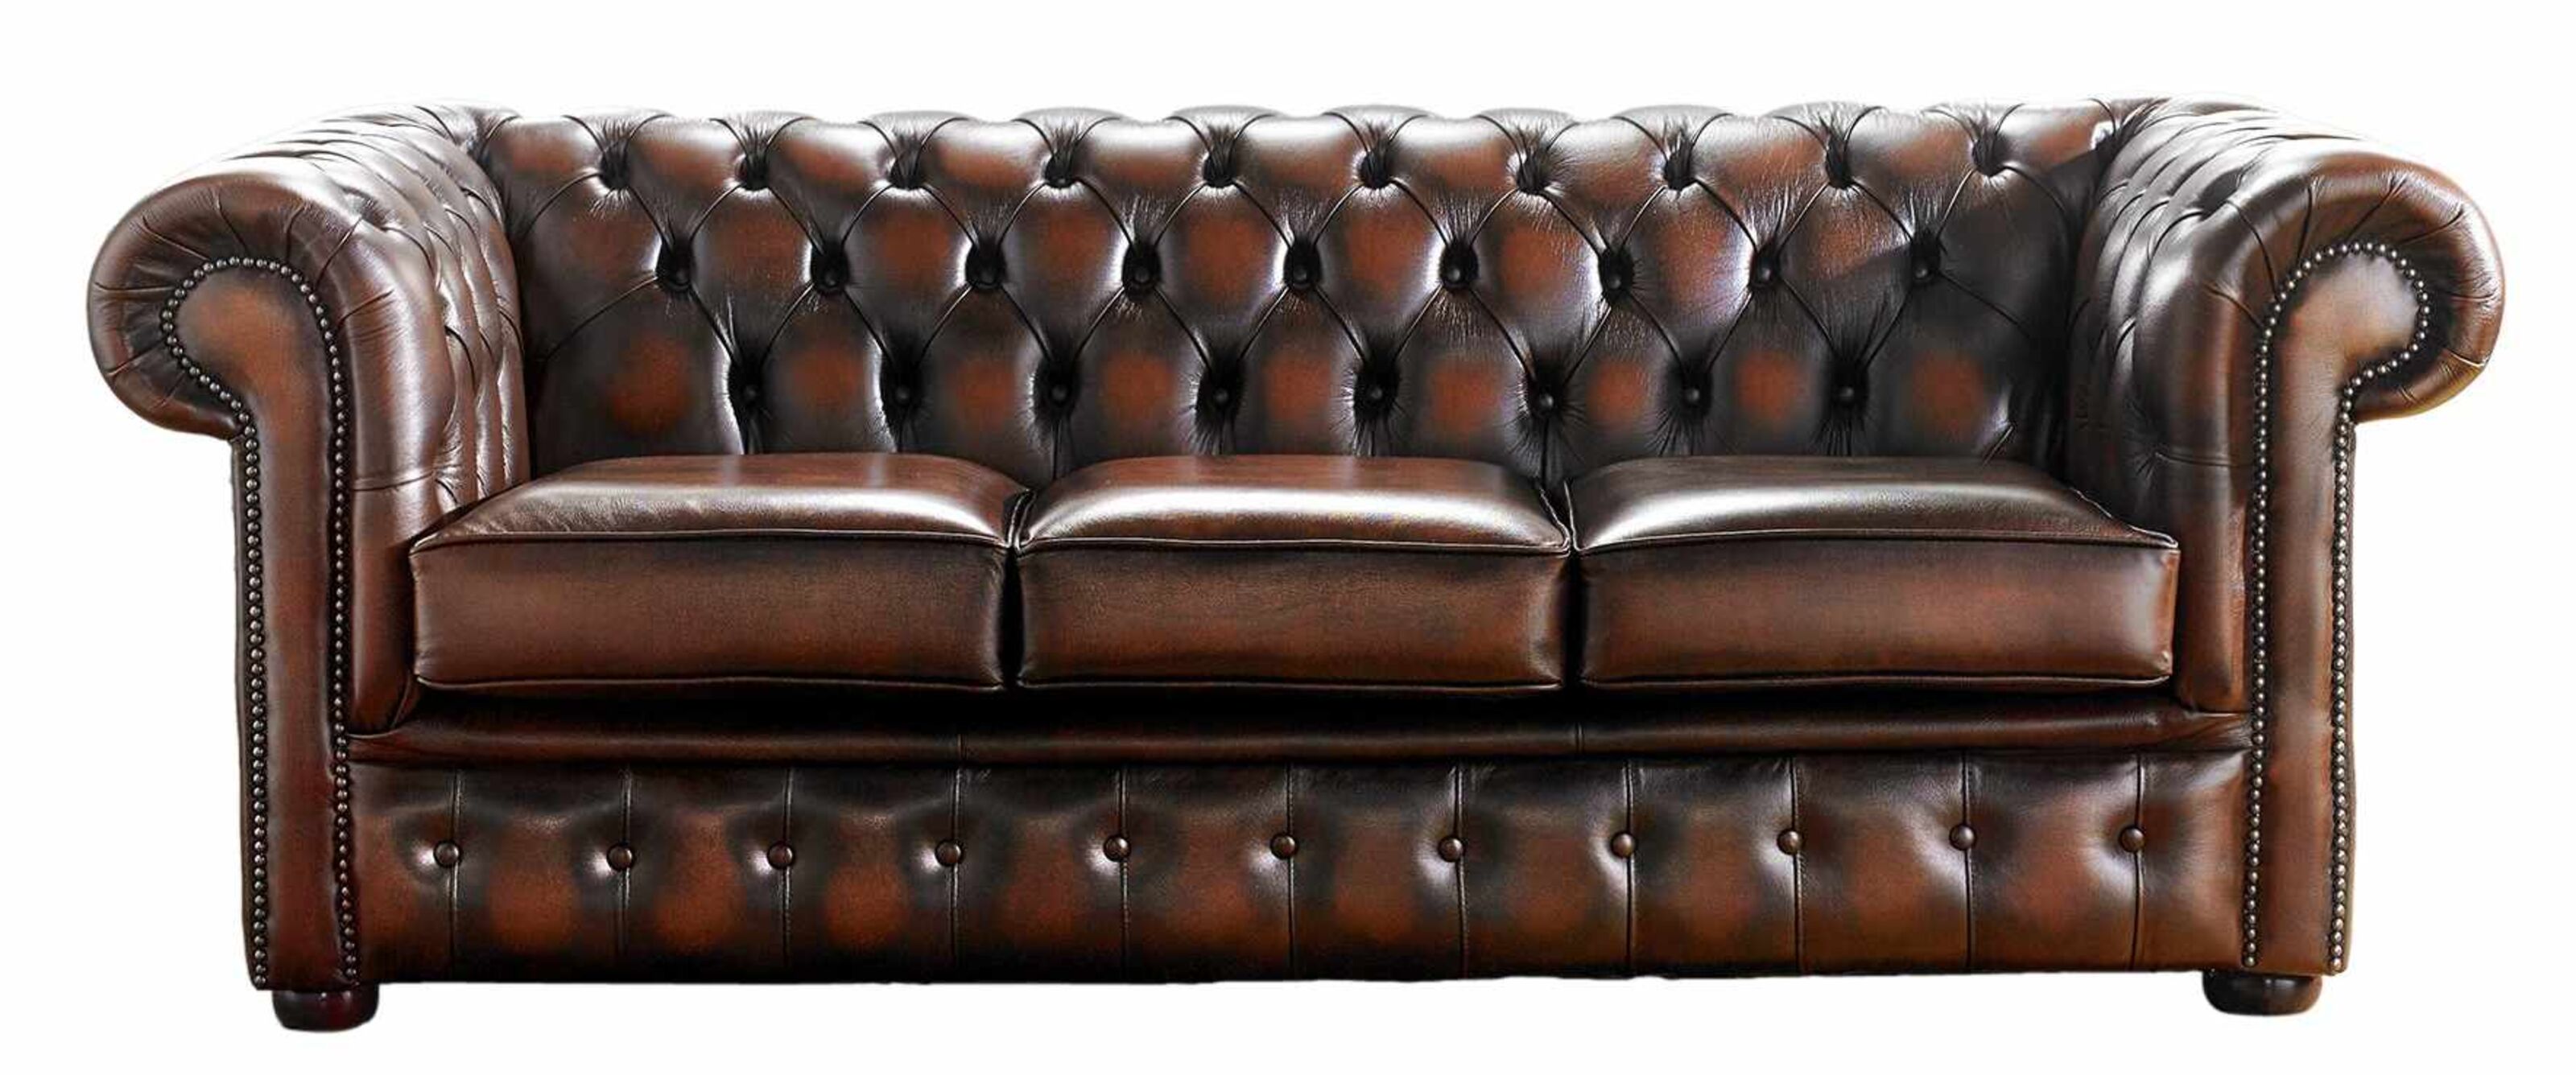 Pet-Friendly Perfection Selecting a Chesterfield Sofa for Your Canine Companion  %Post Title